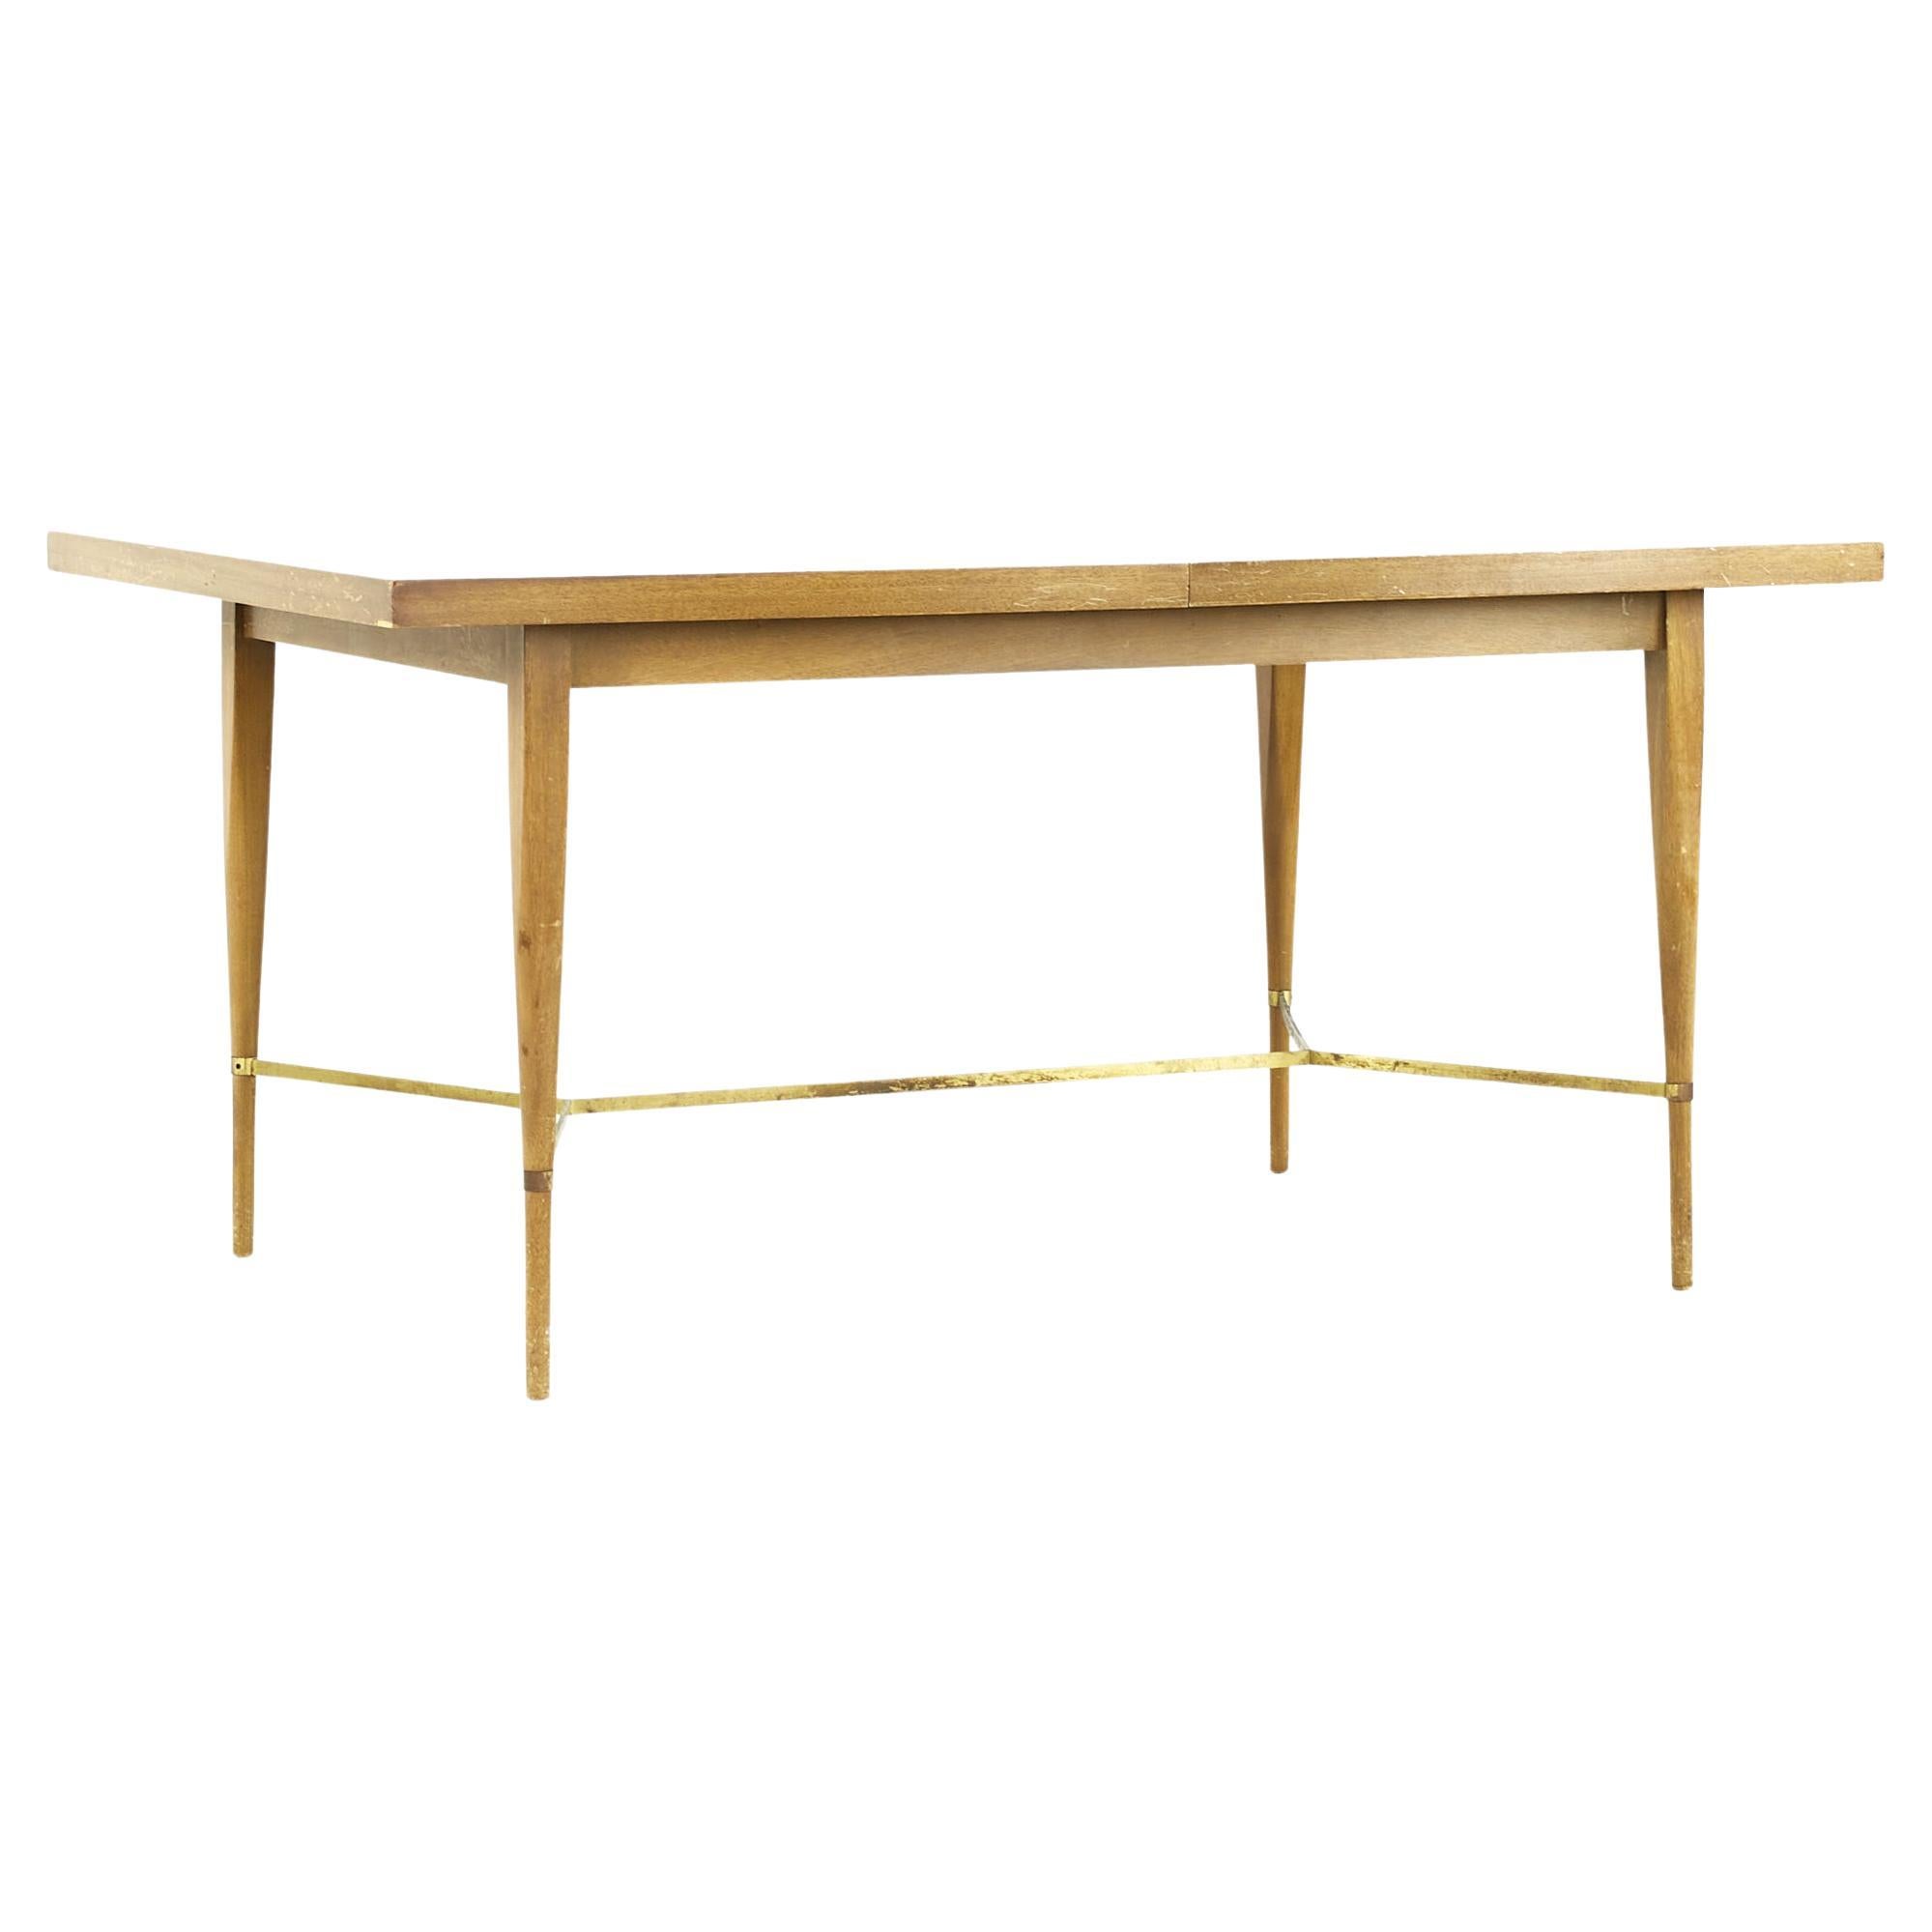 Paul McCobb for Calvin Midcentury Brass and Mahogany Dining Table with Leaves